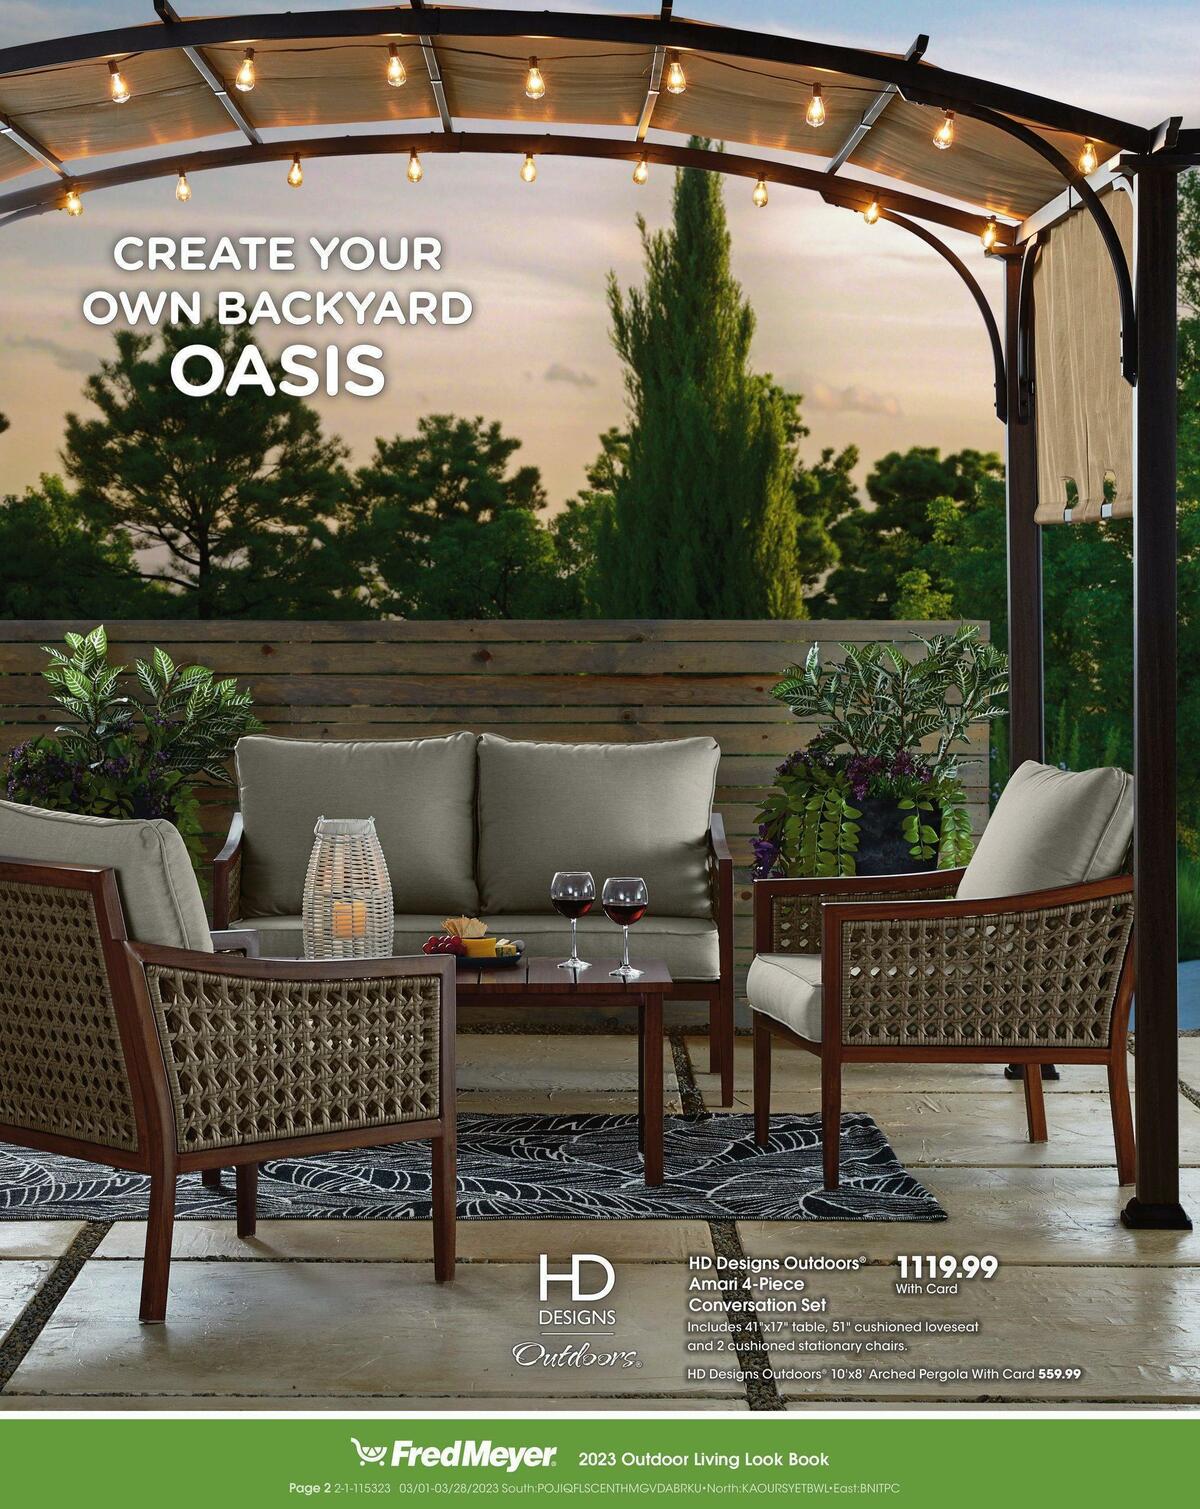 Fred Meyer Outdoor Living Weekly Ad from March 1